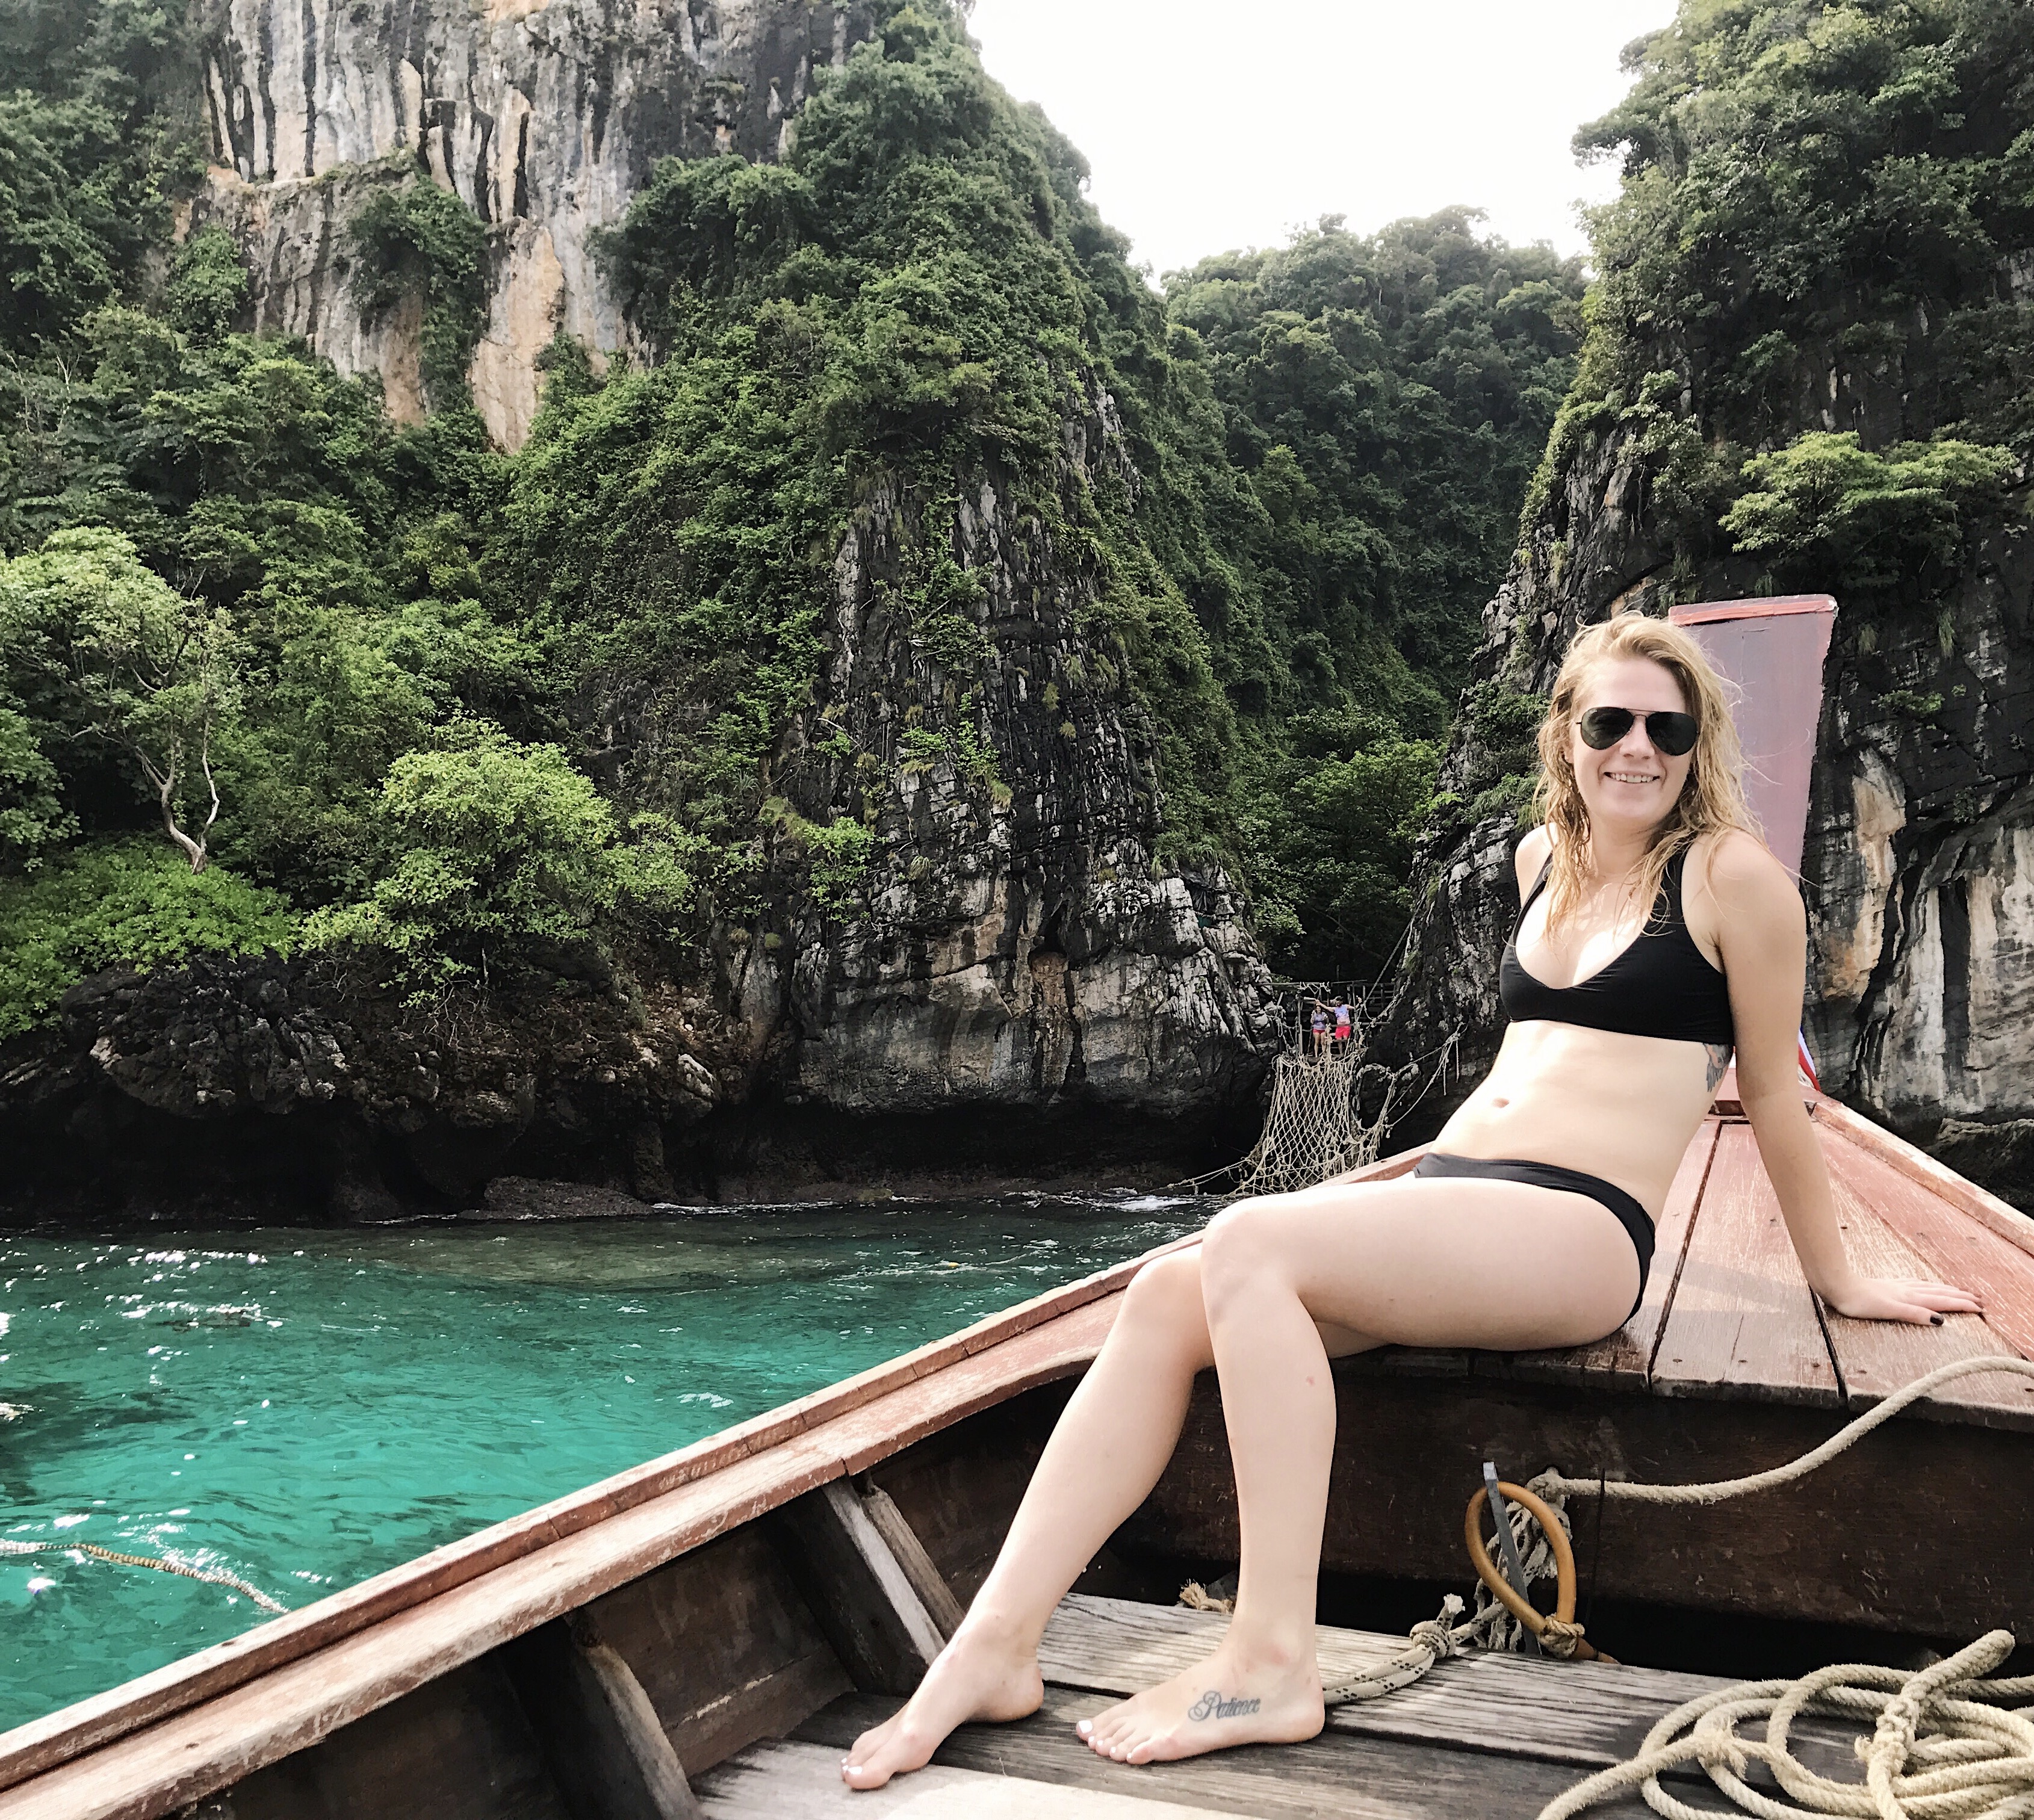 Tips for Solo Travel | Advice for the Female Solo Traveler on Safety, Affordability and Having Fun.